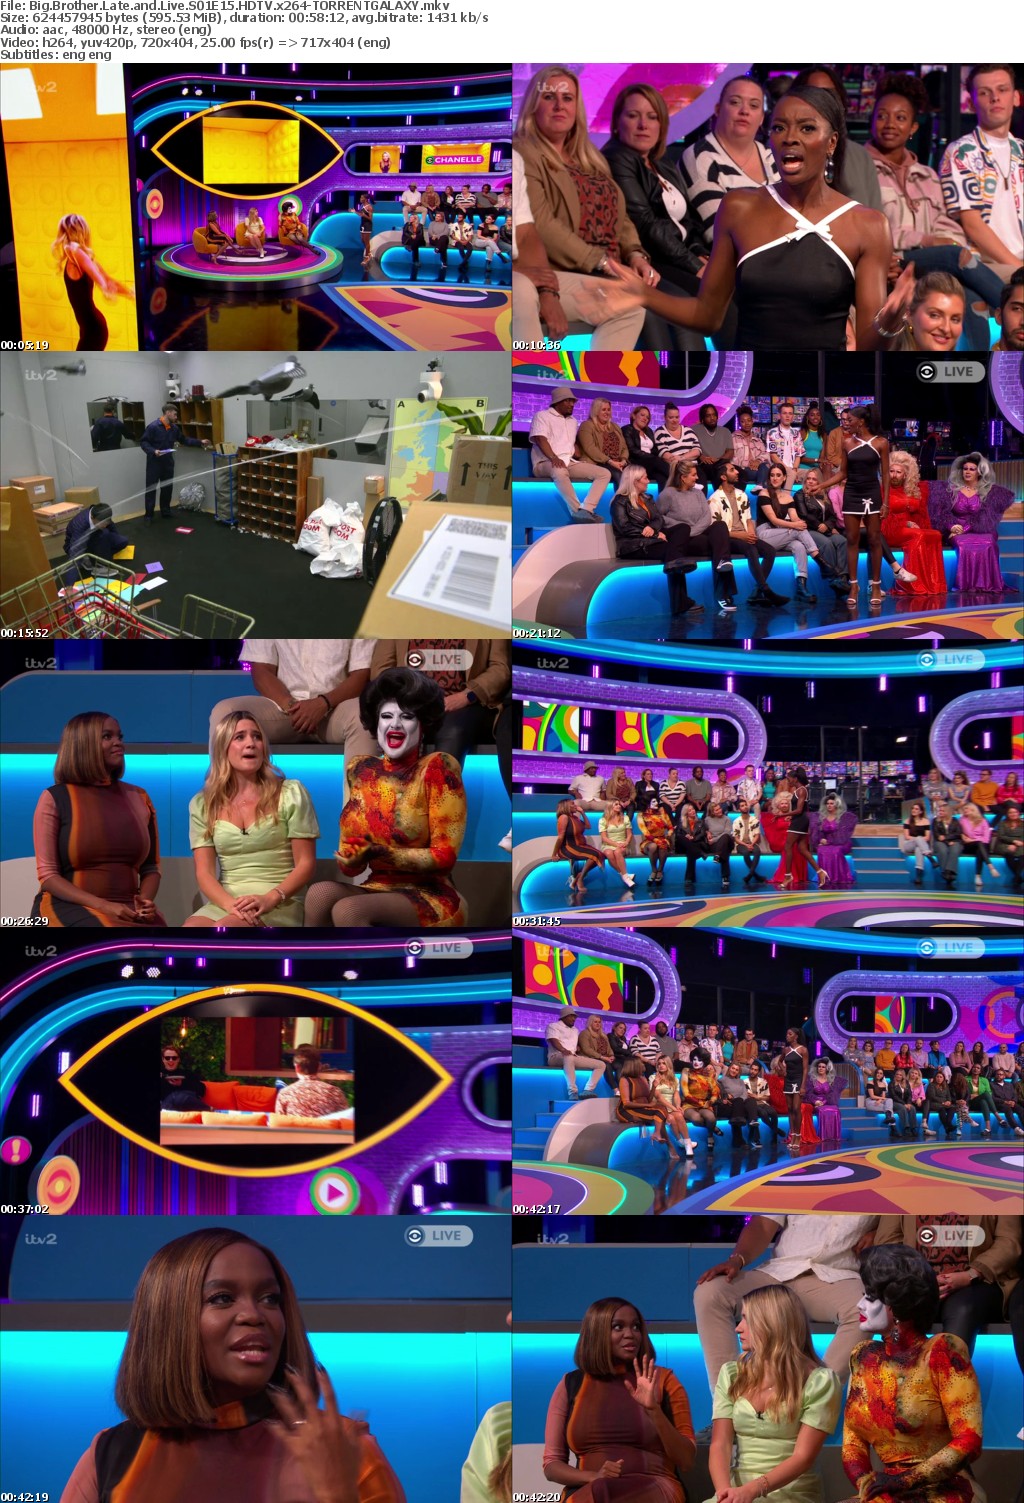 Big Brother Late and Live S01E15 HDTV x264-GALAXY